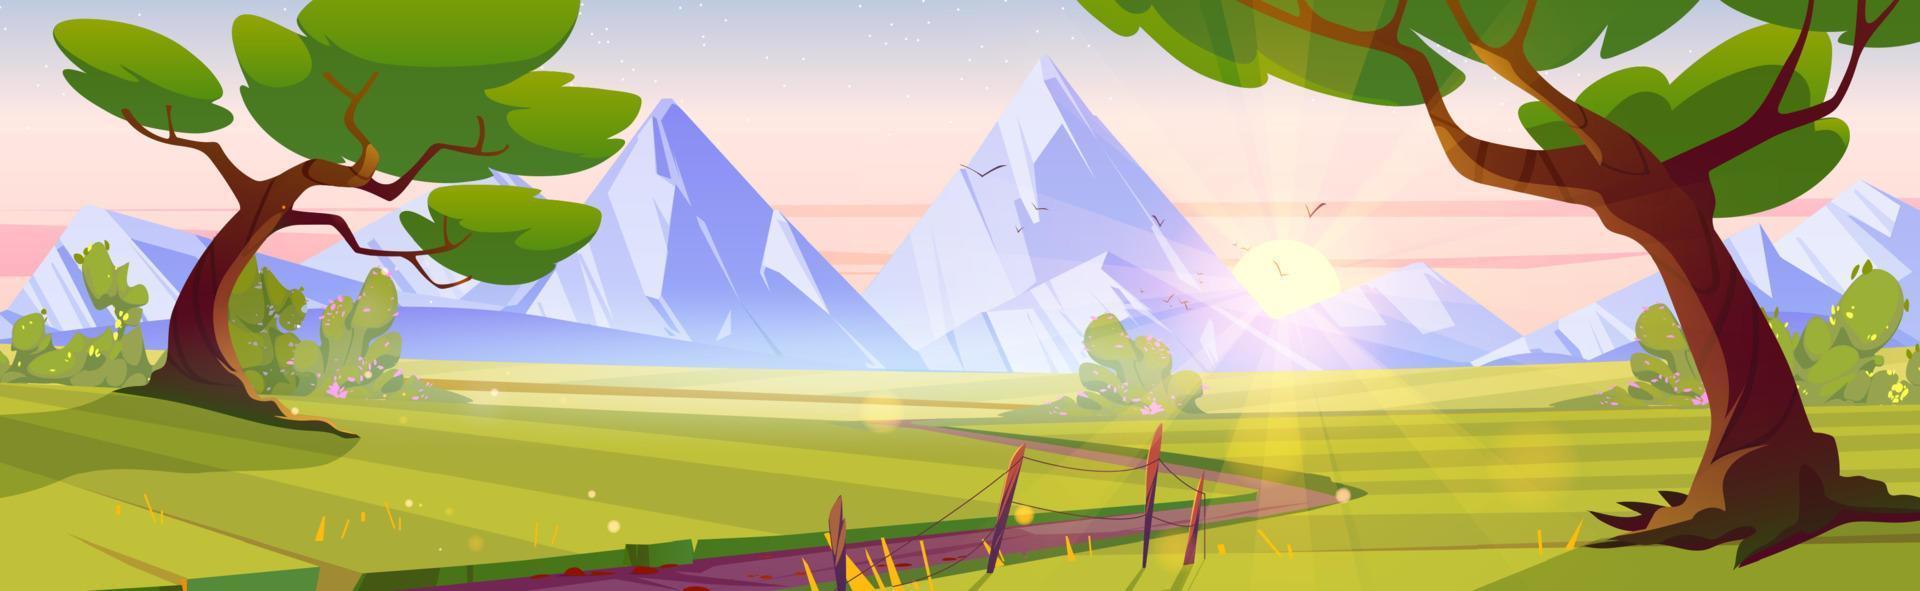 Cartoon nature landscape early morning background vector